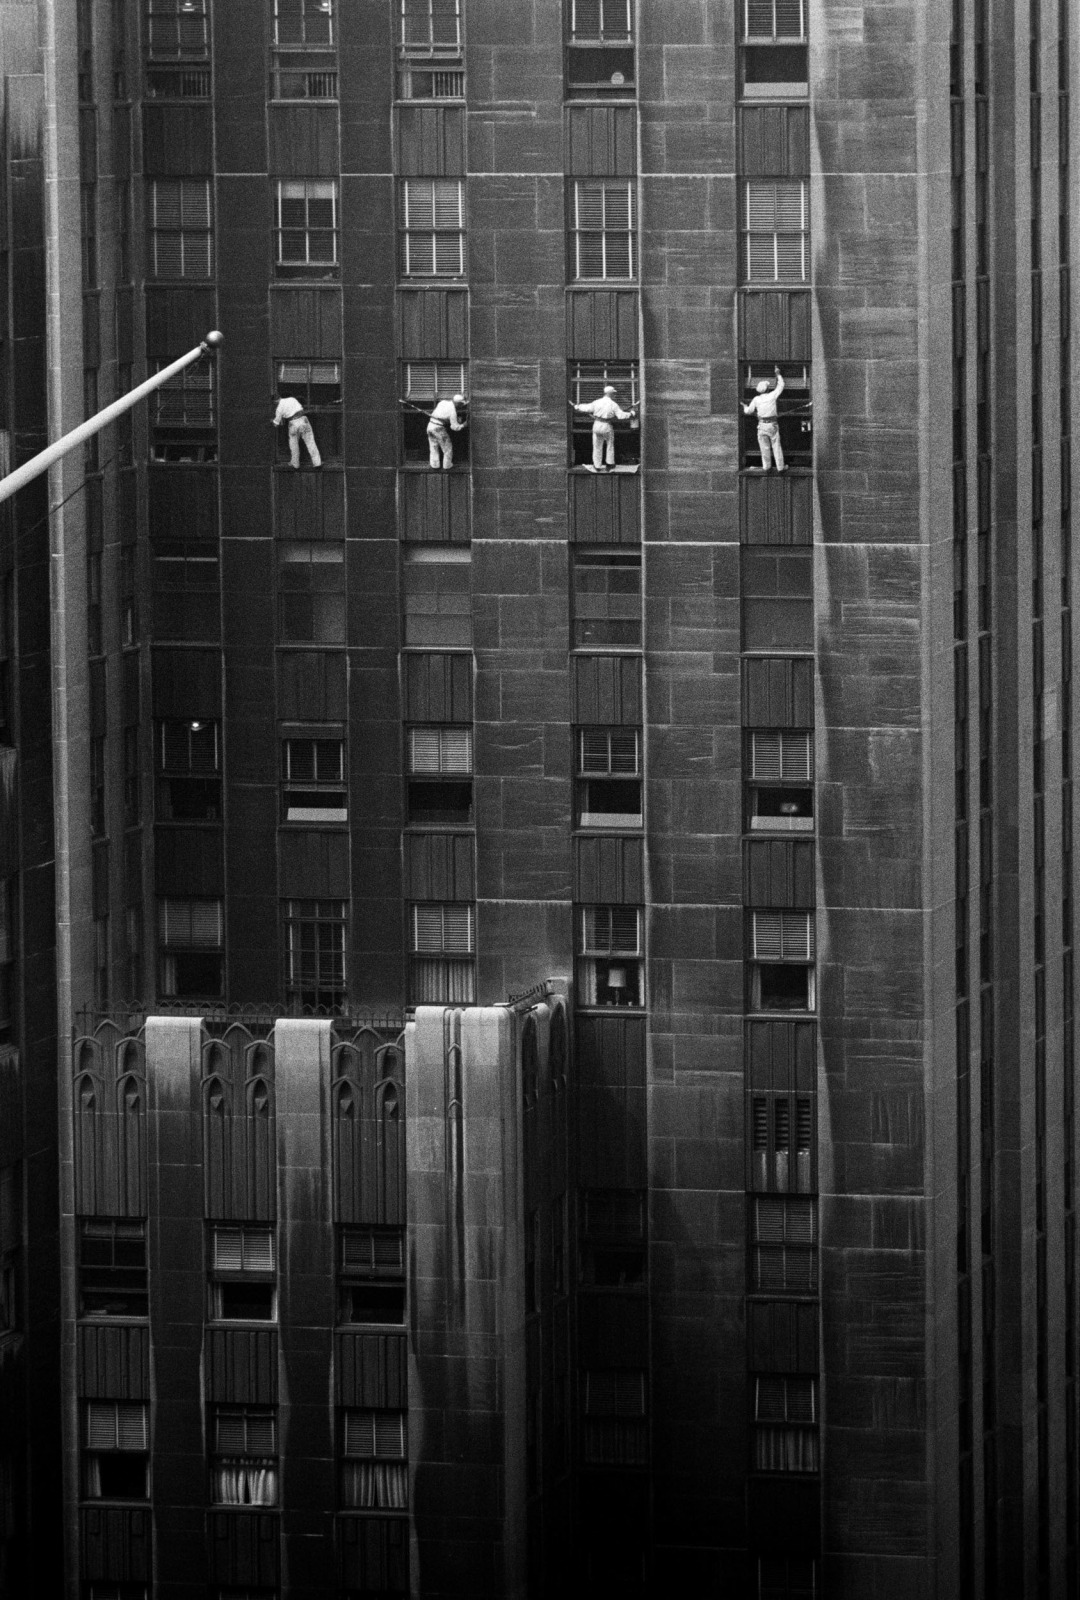 Four window-washers wearing white are photographed in black and white on a skyscraper in motion as they clean the windows.